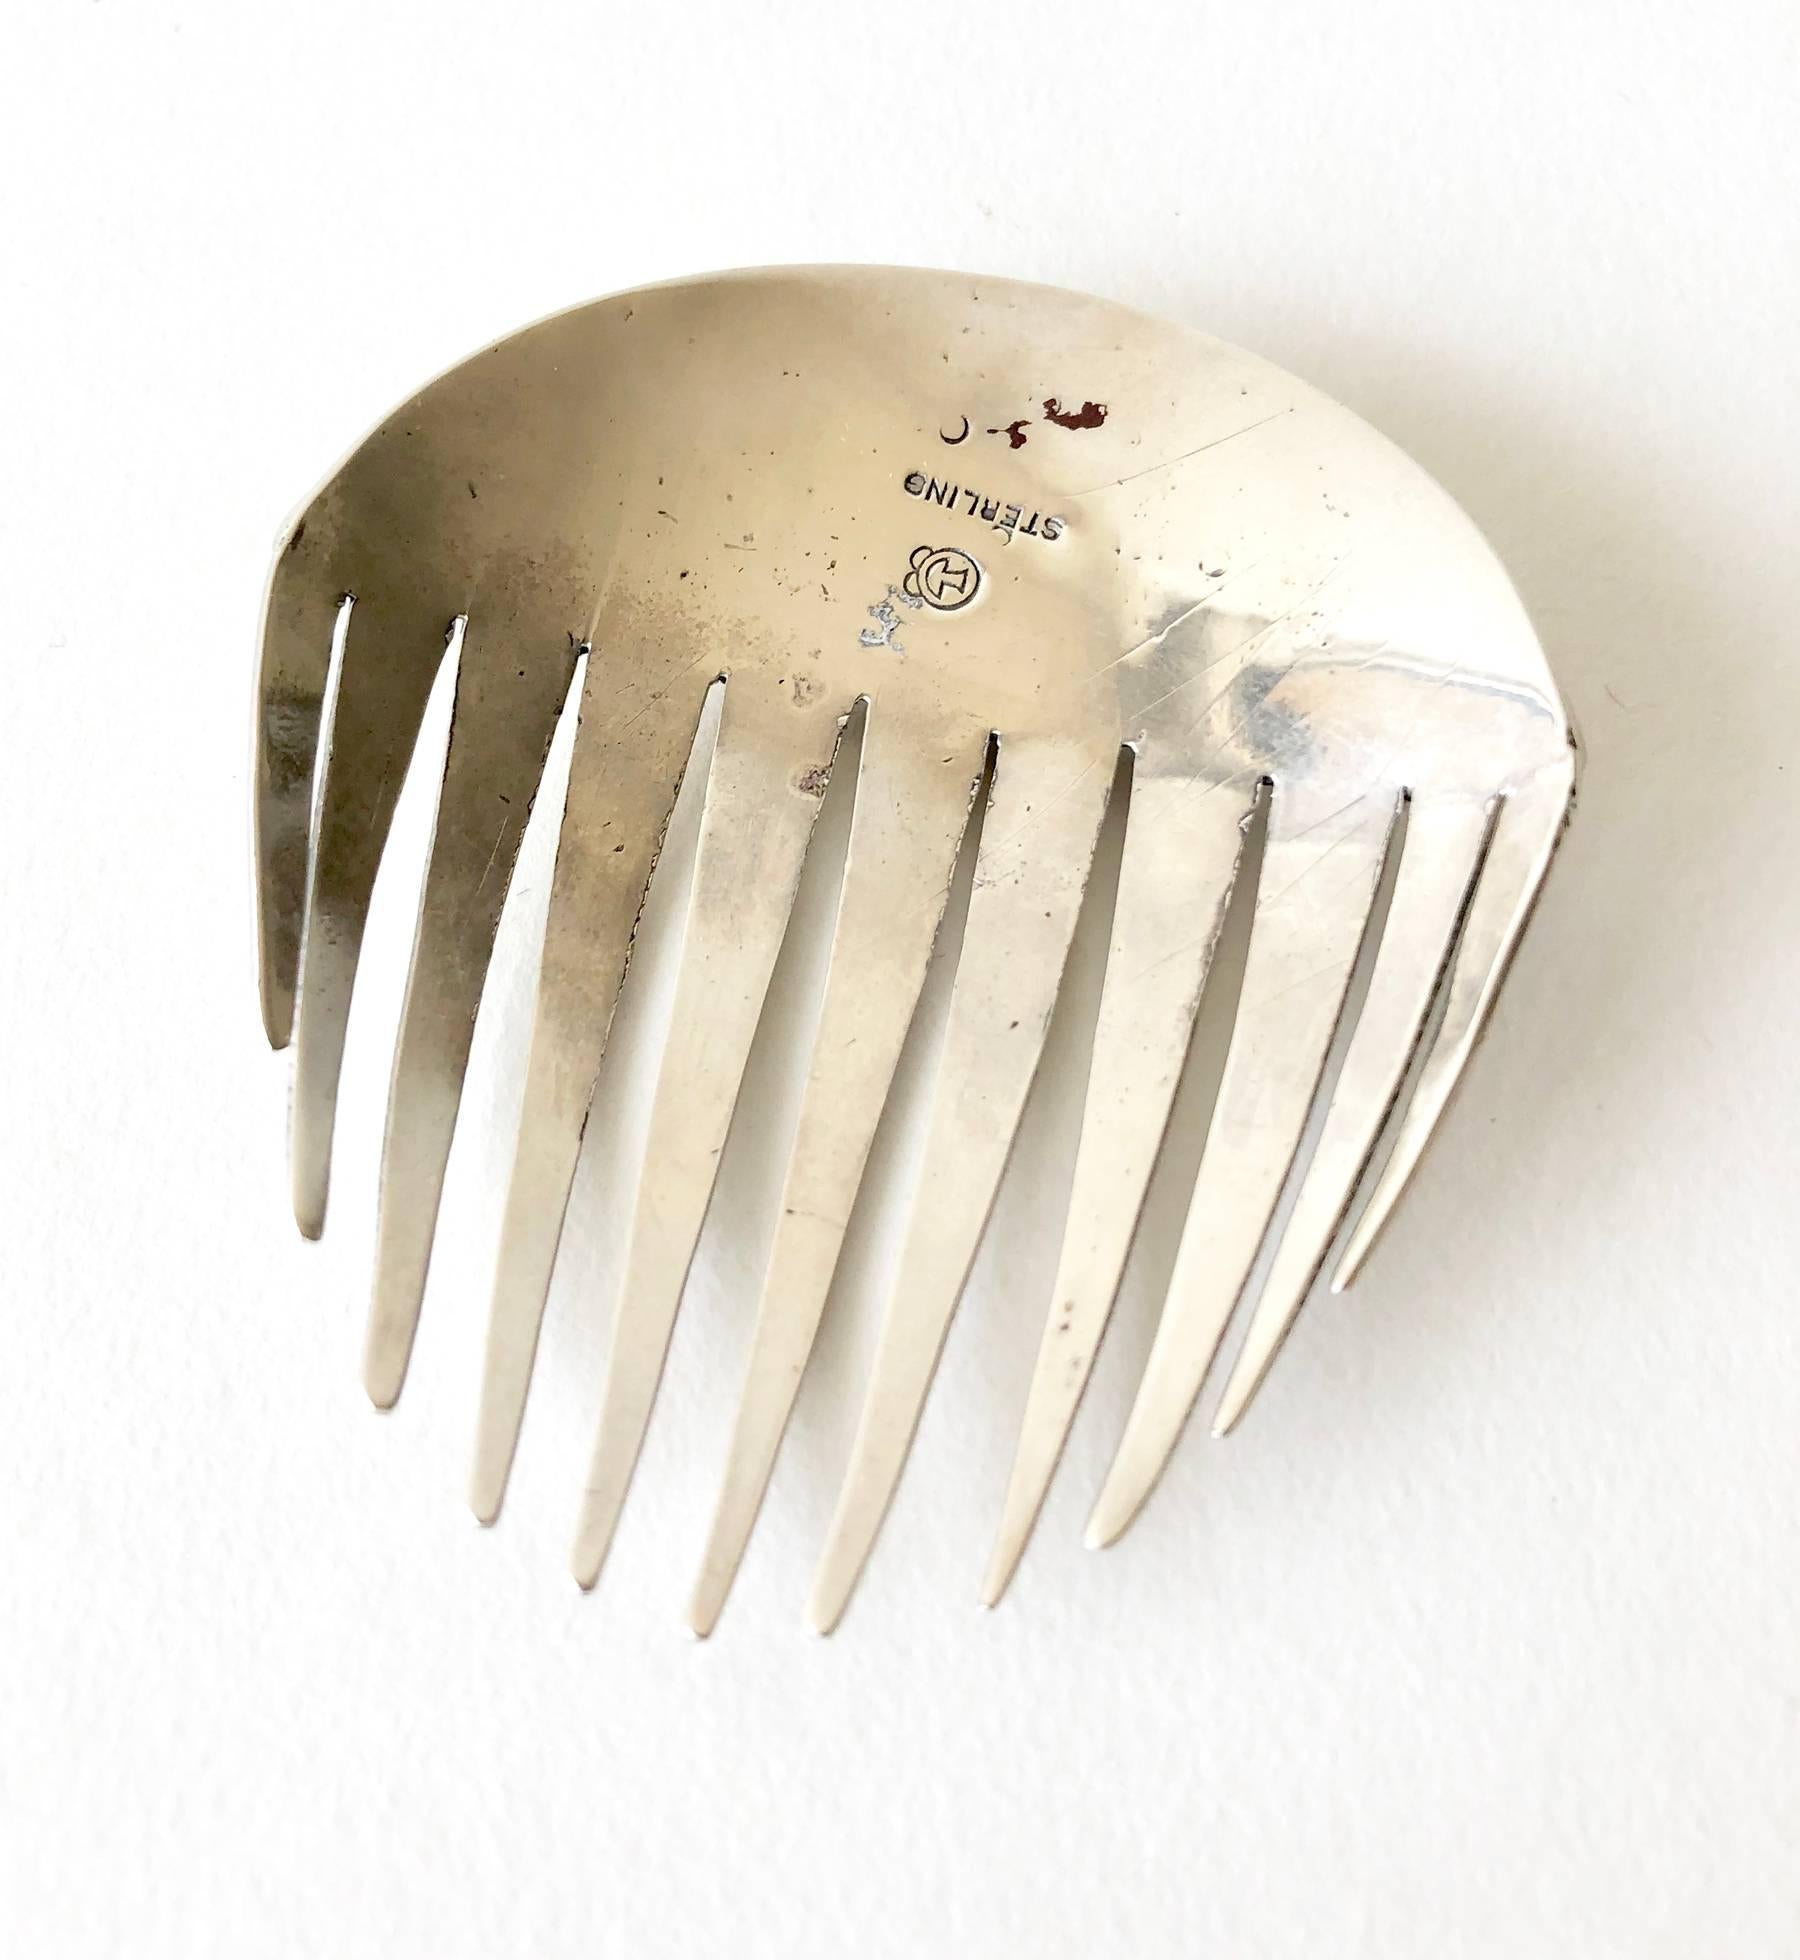 Sterling Silver hair comb with a high domed chrysoprase created by Sam Kramer of New York, circa 1950's. Comb measures 2.5